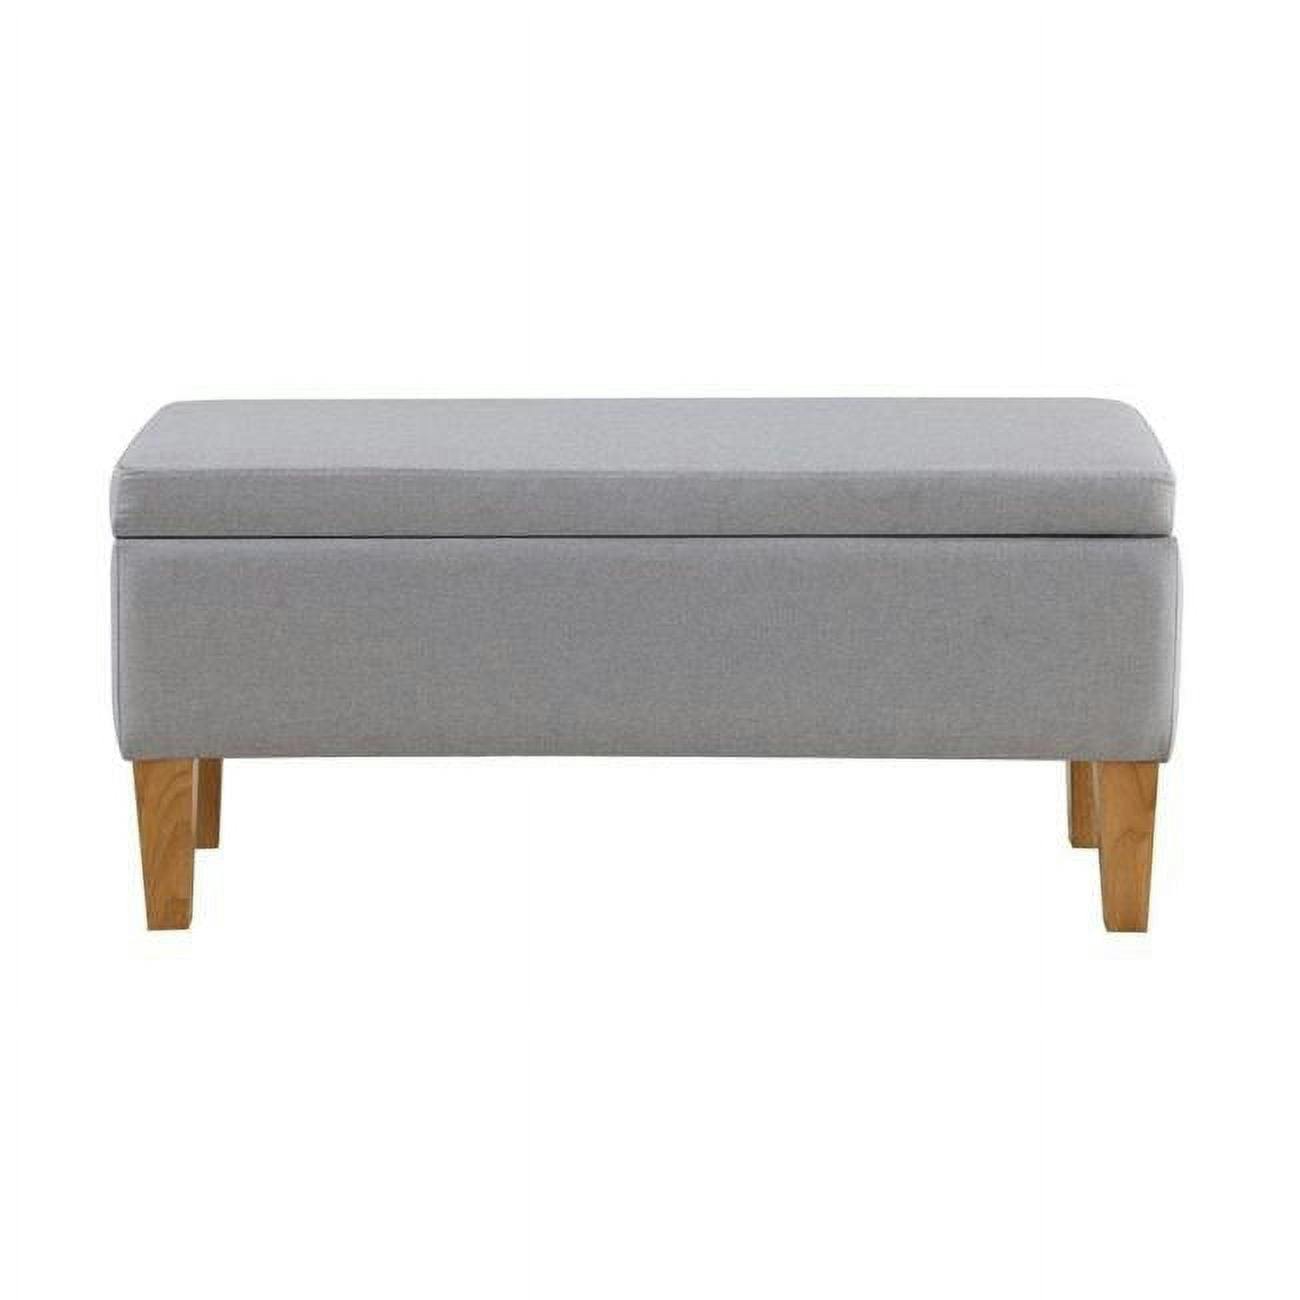 Mico 45" Gray Fabric Upholstered Storage Ottoman Bench